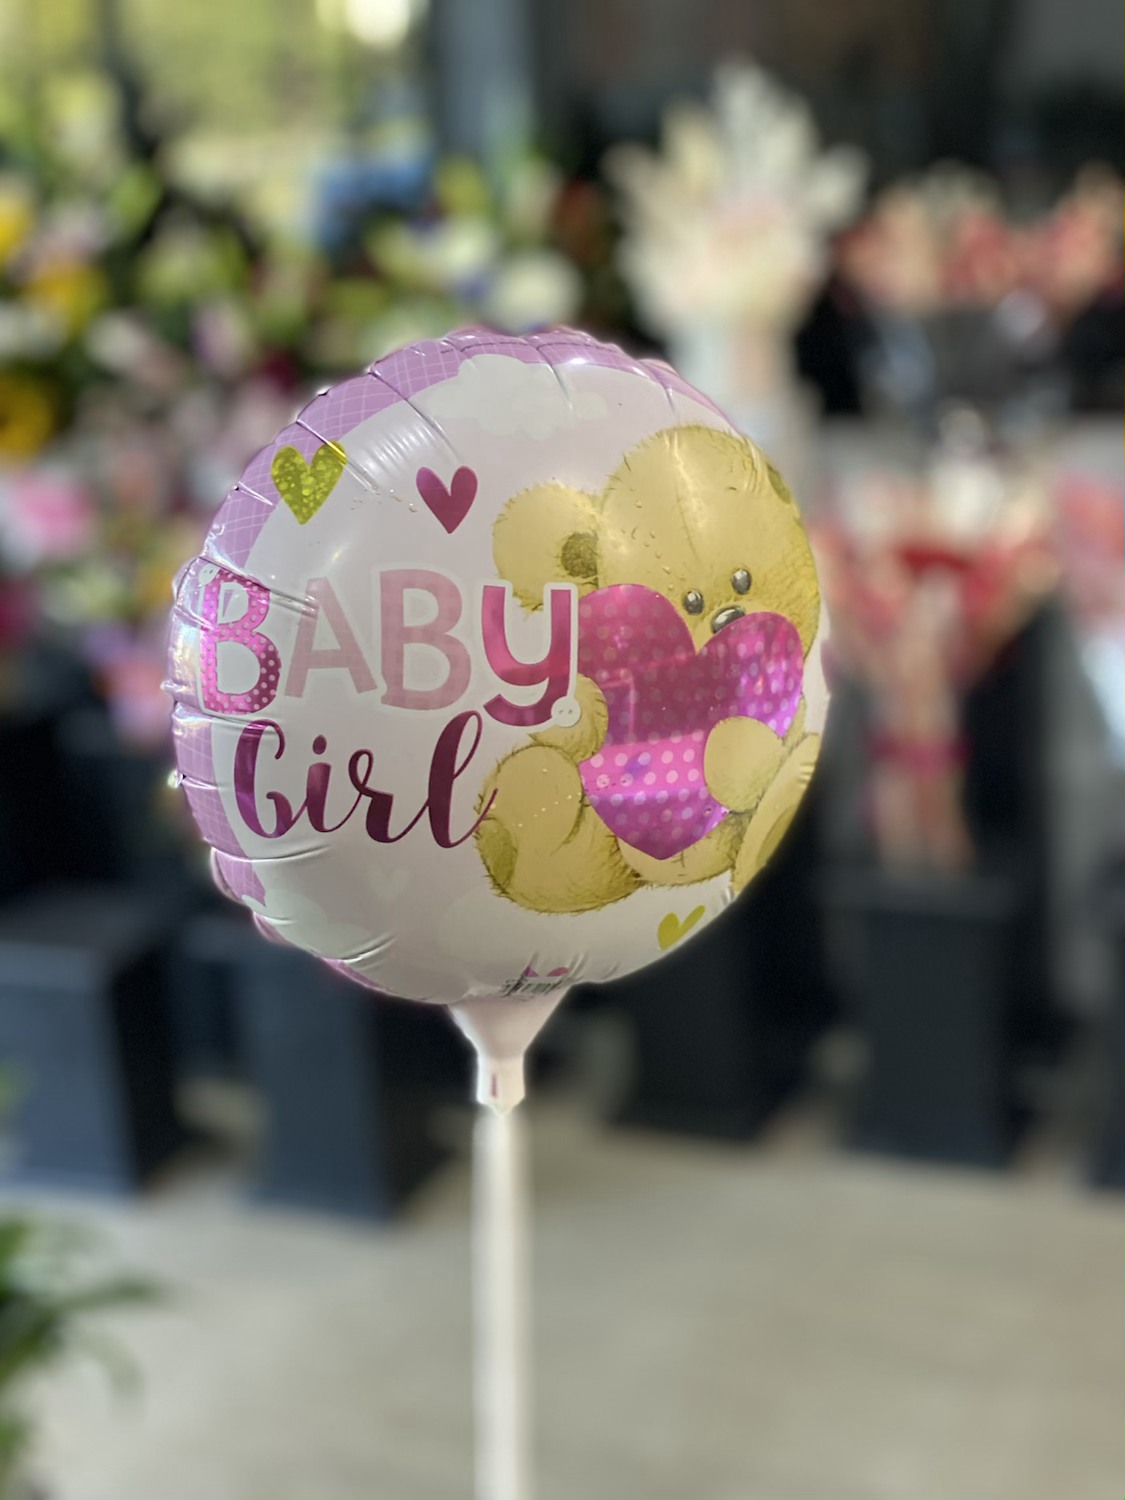 Baby girl stick ballon to go with flowers - Vermont Florist